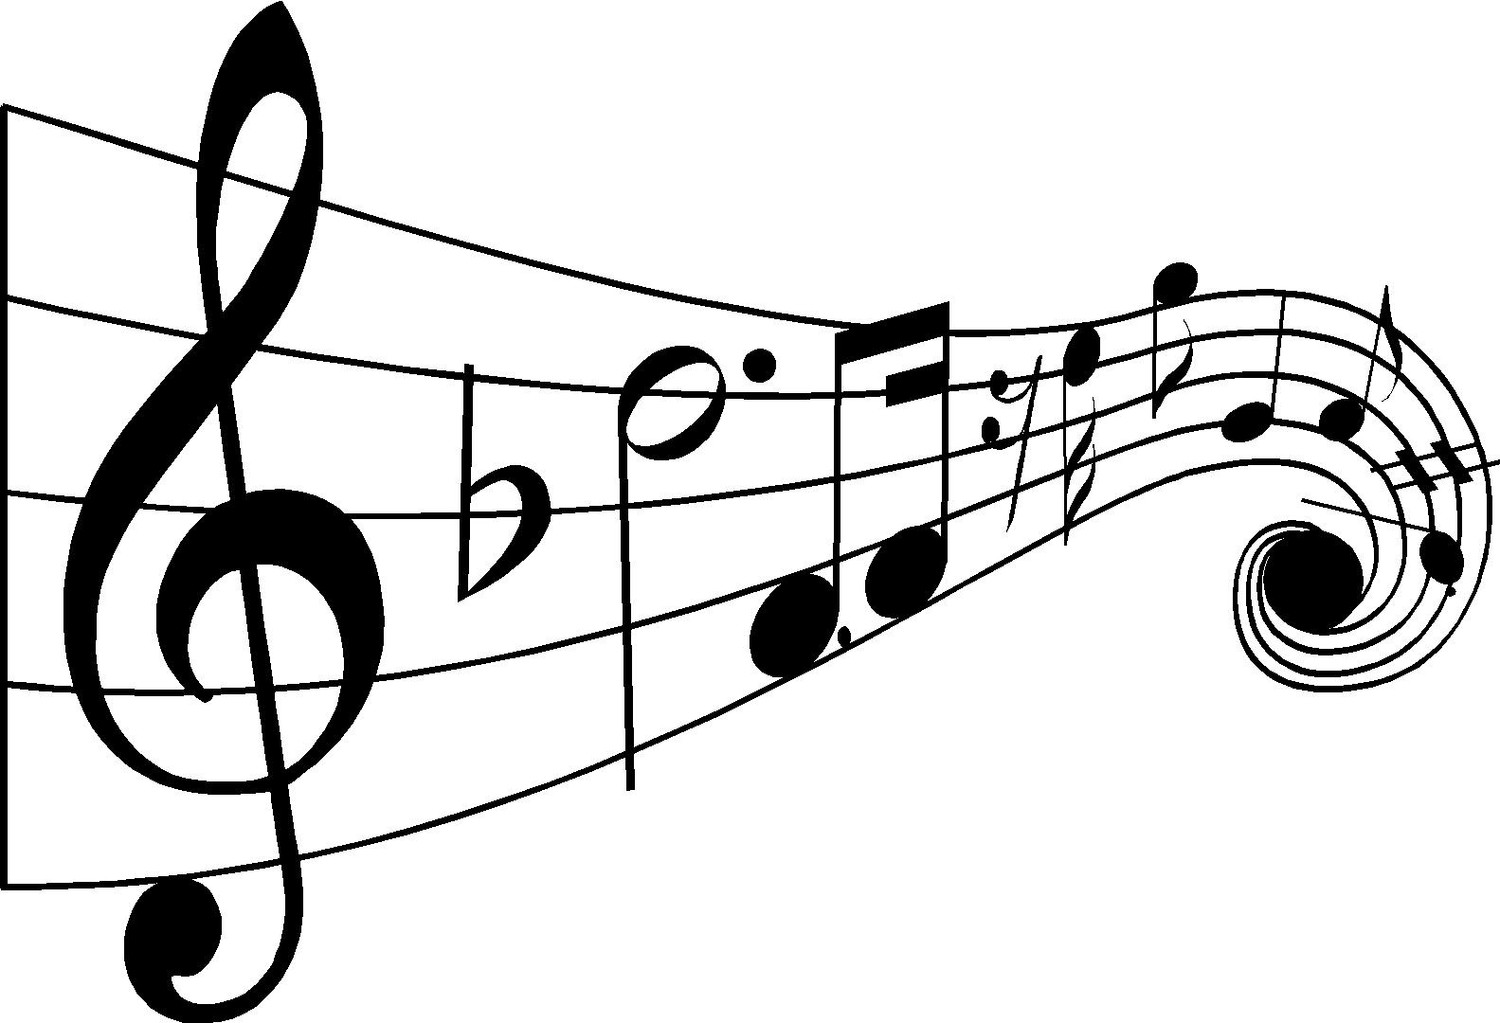 Music notes on staff clipart - ClipartFox